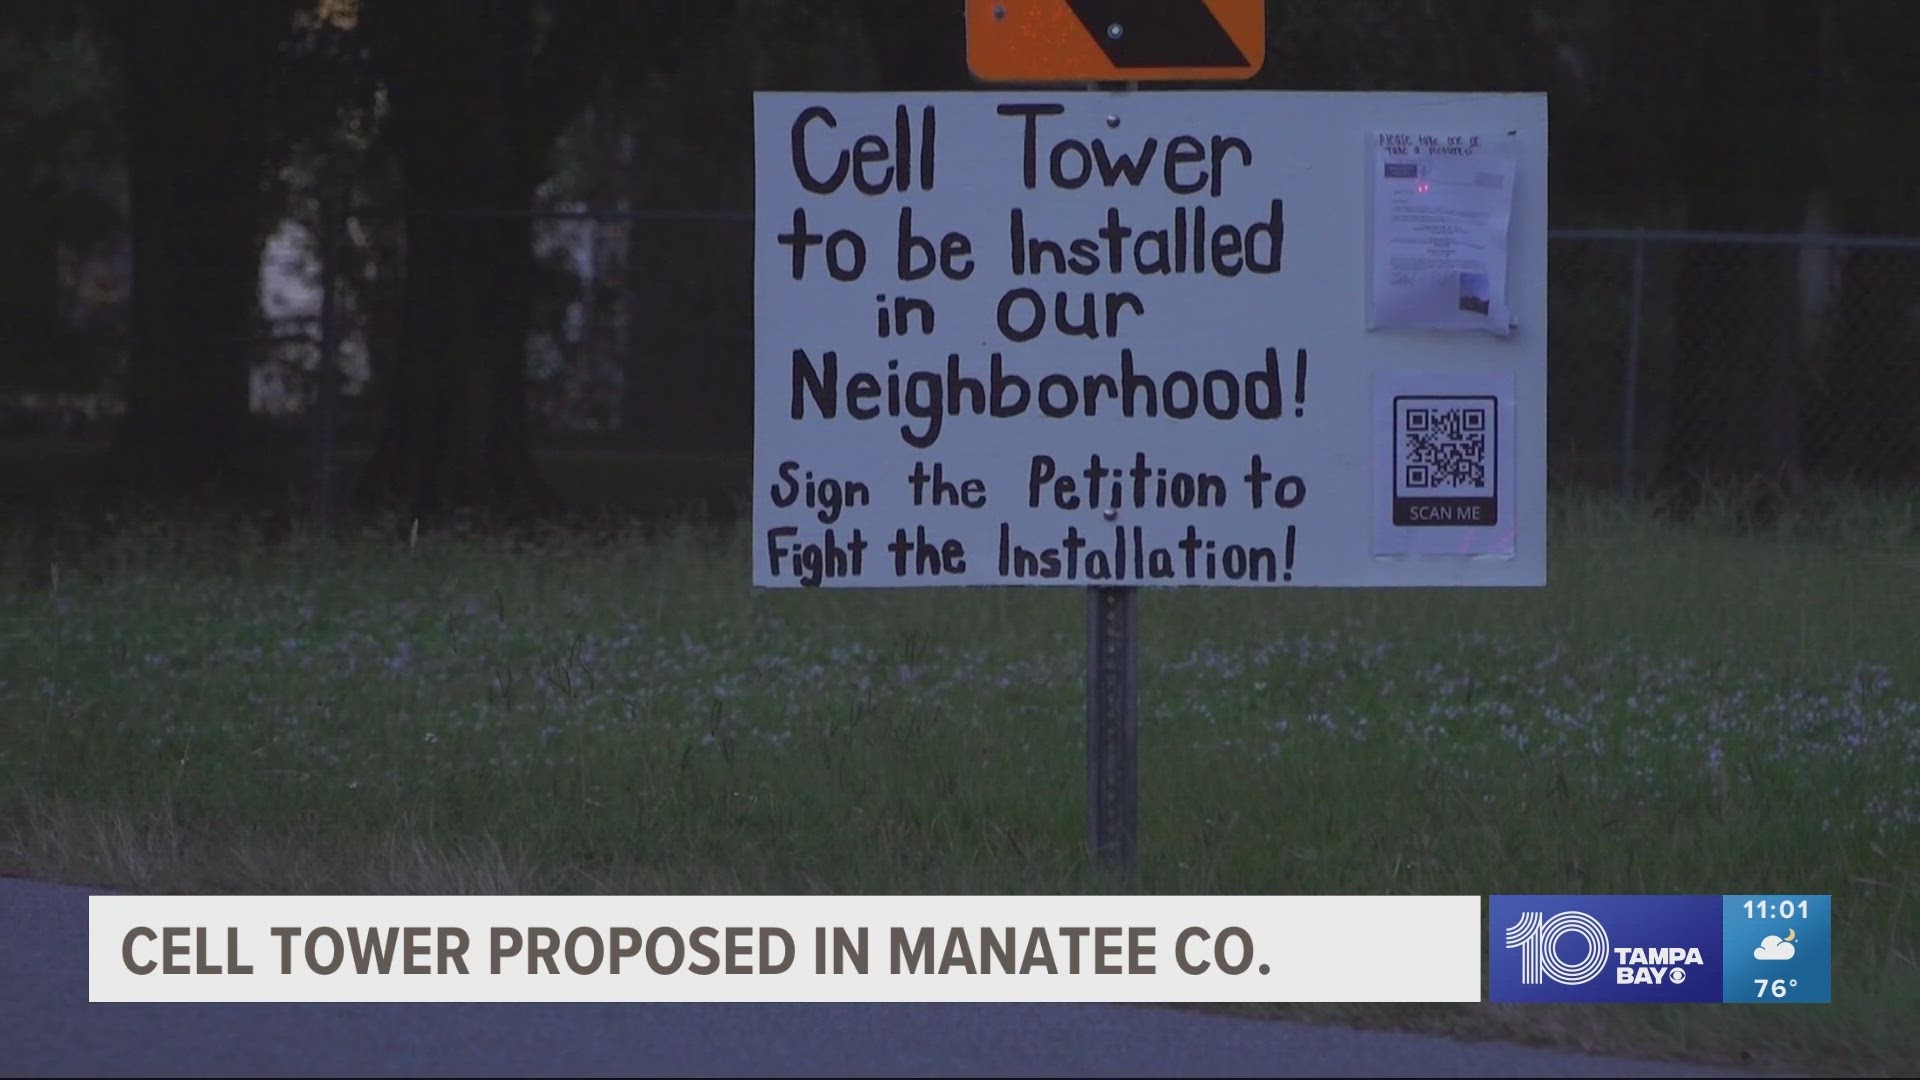 Residents said they have concerns with the tower so close to where they live. Some worry about their health and others about their property values.